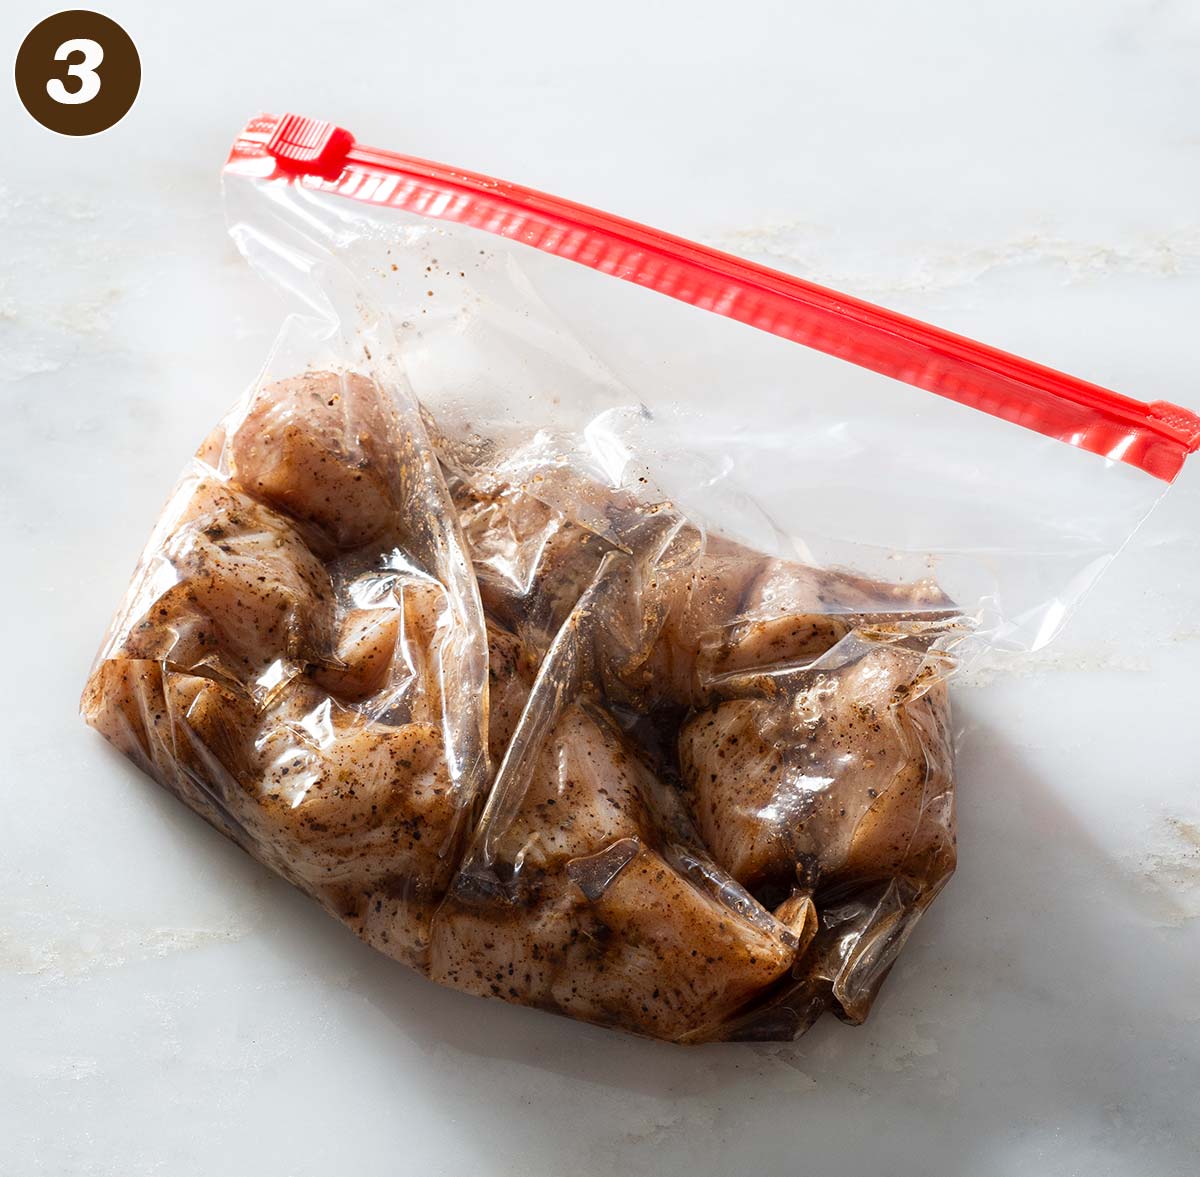 Chicken and marinade in a plastic bag.